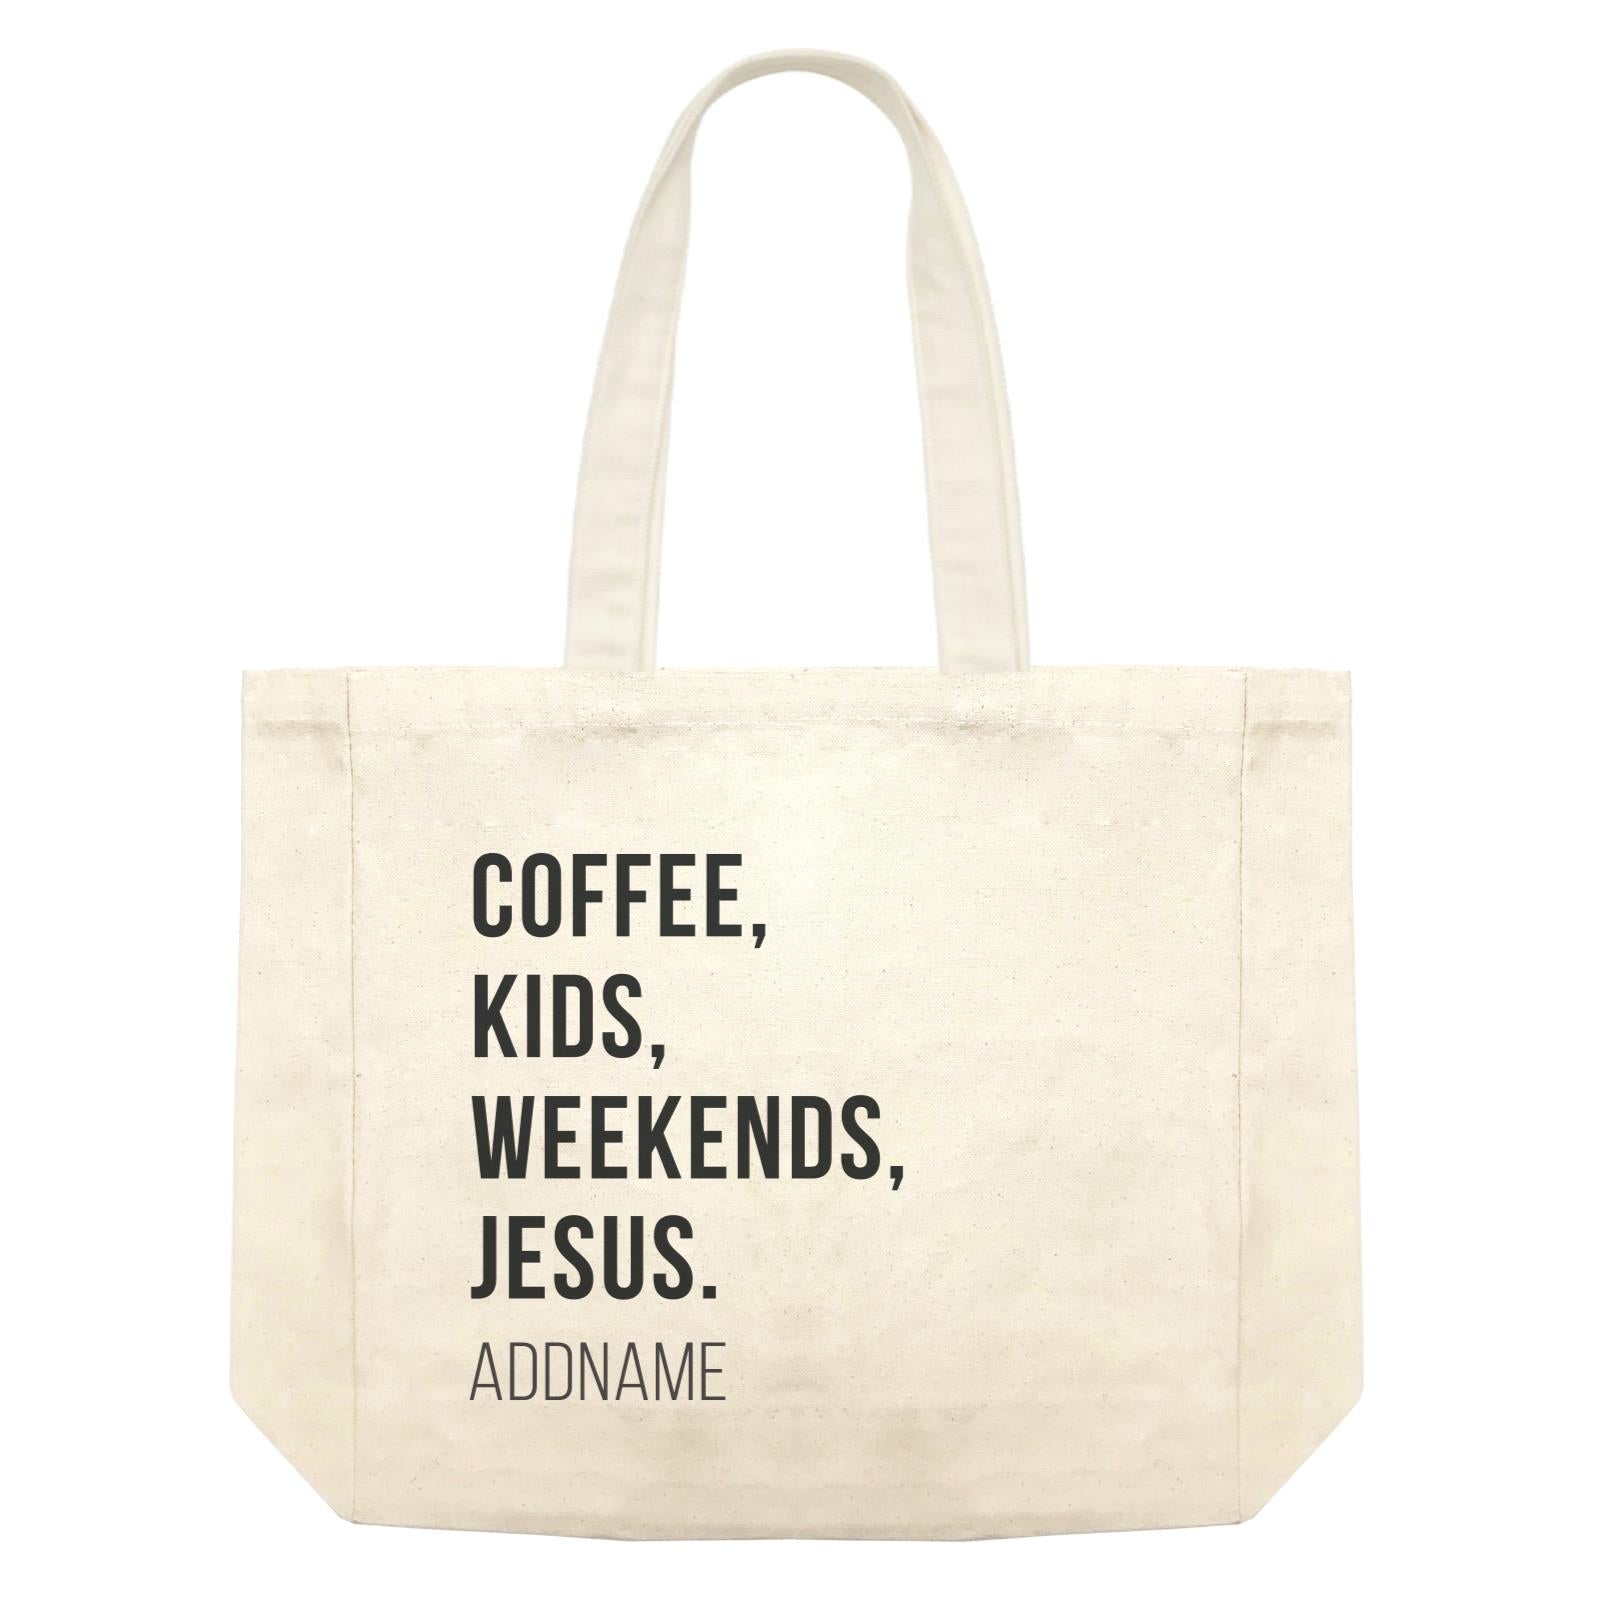 Random Quotes Coffee Kids Weekends Jesus Addname Shopping Bag